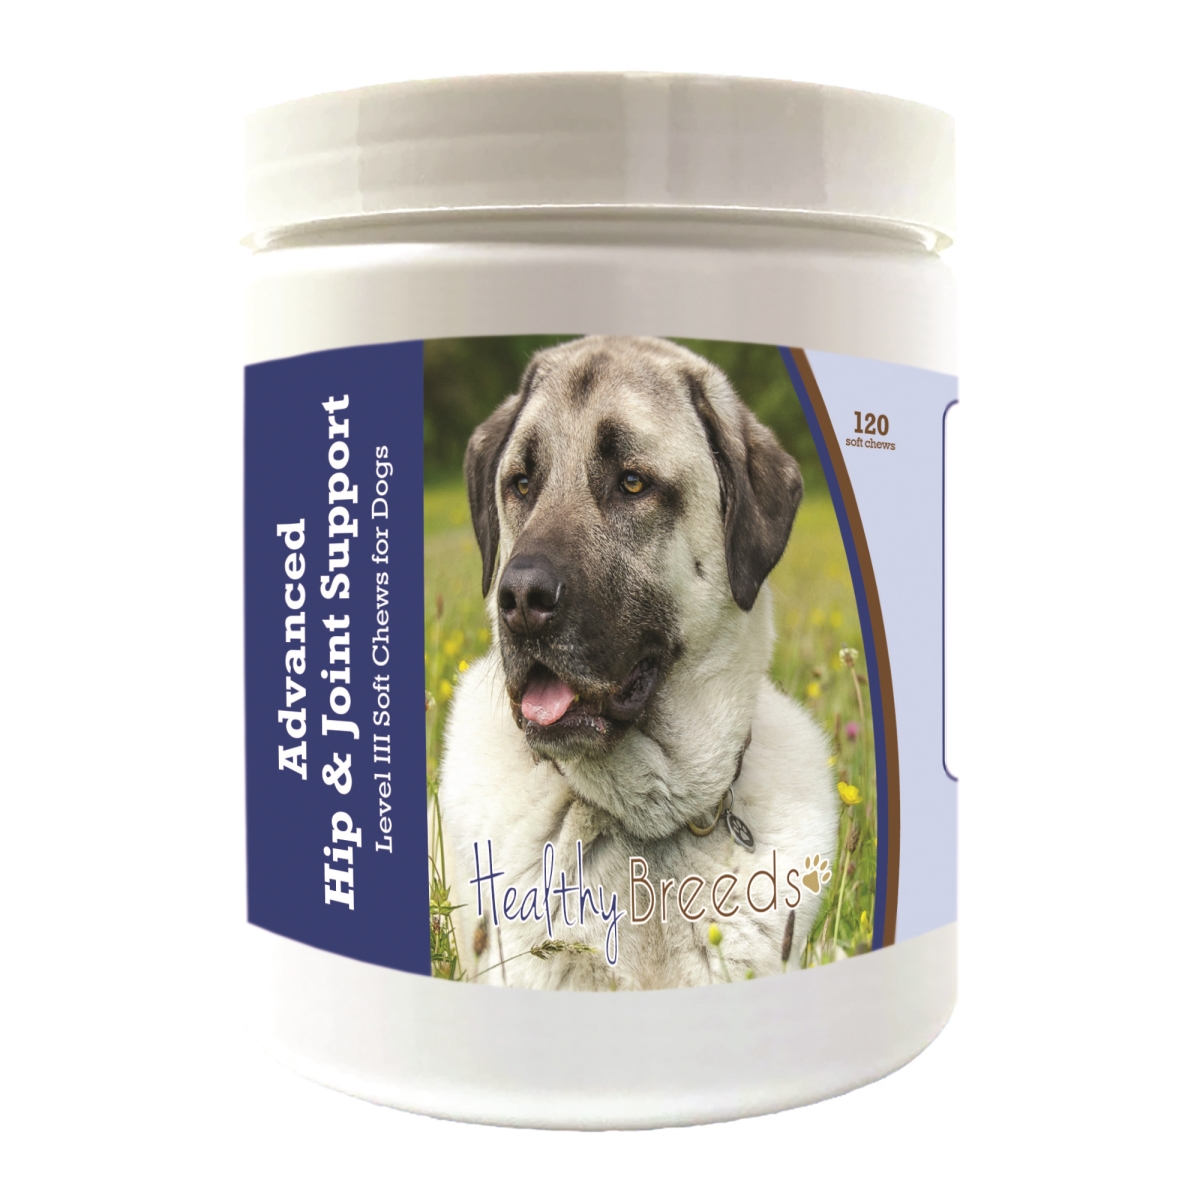 Picture of Healthy Breeds 192959897463 Anatolian Shepherd Dog Advanced Hip & Joint Support Level III Soft Chews for Dogs